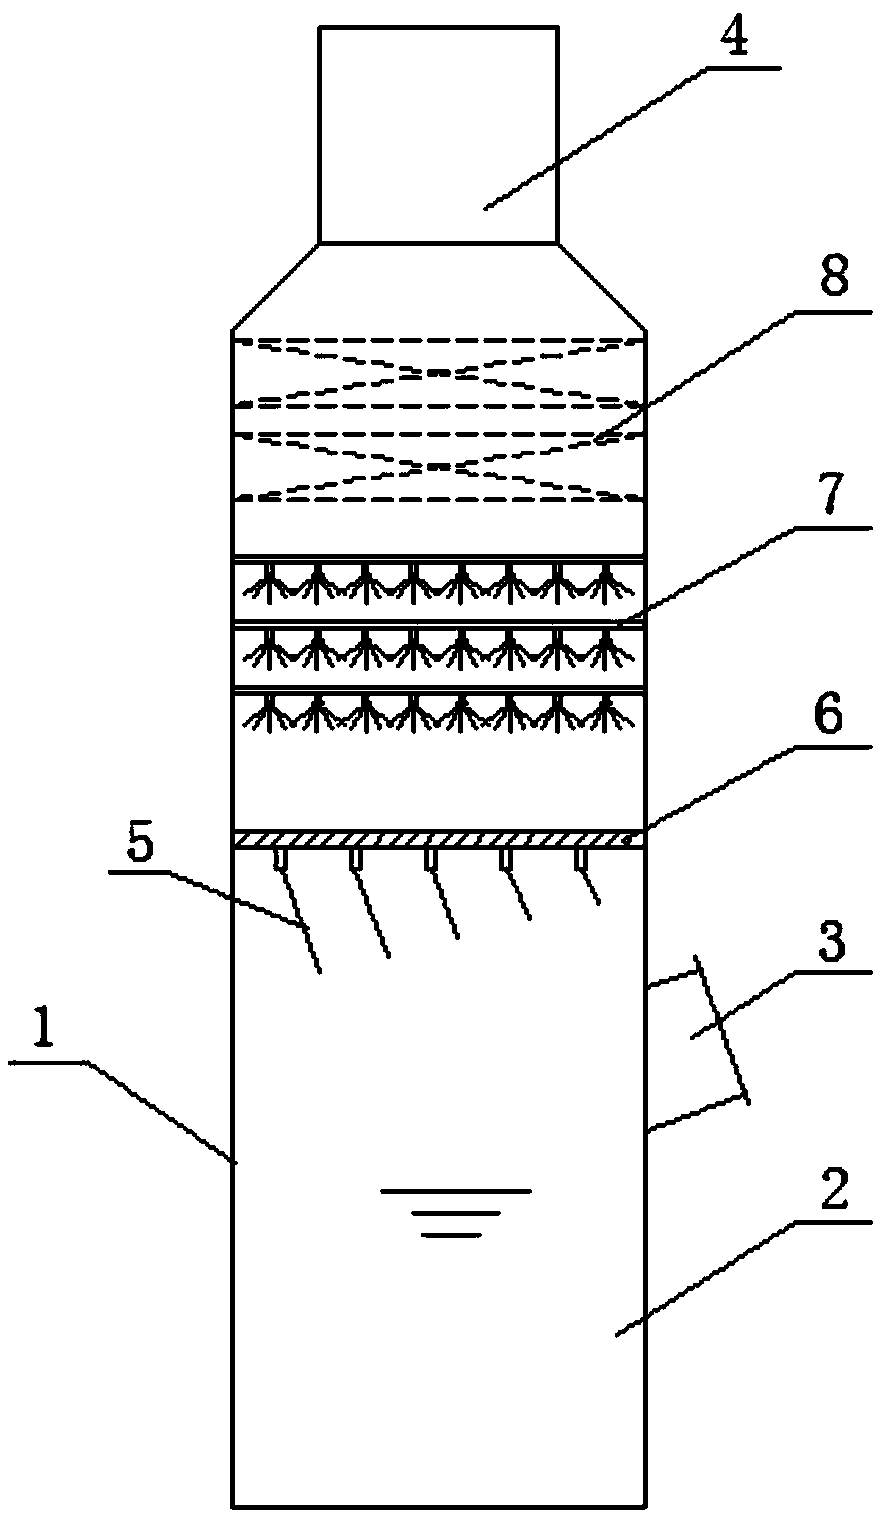 Flue gas desulfurization absorption tower with twin-stage air flow distribution device